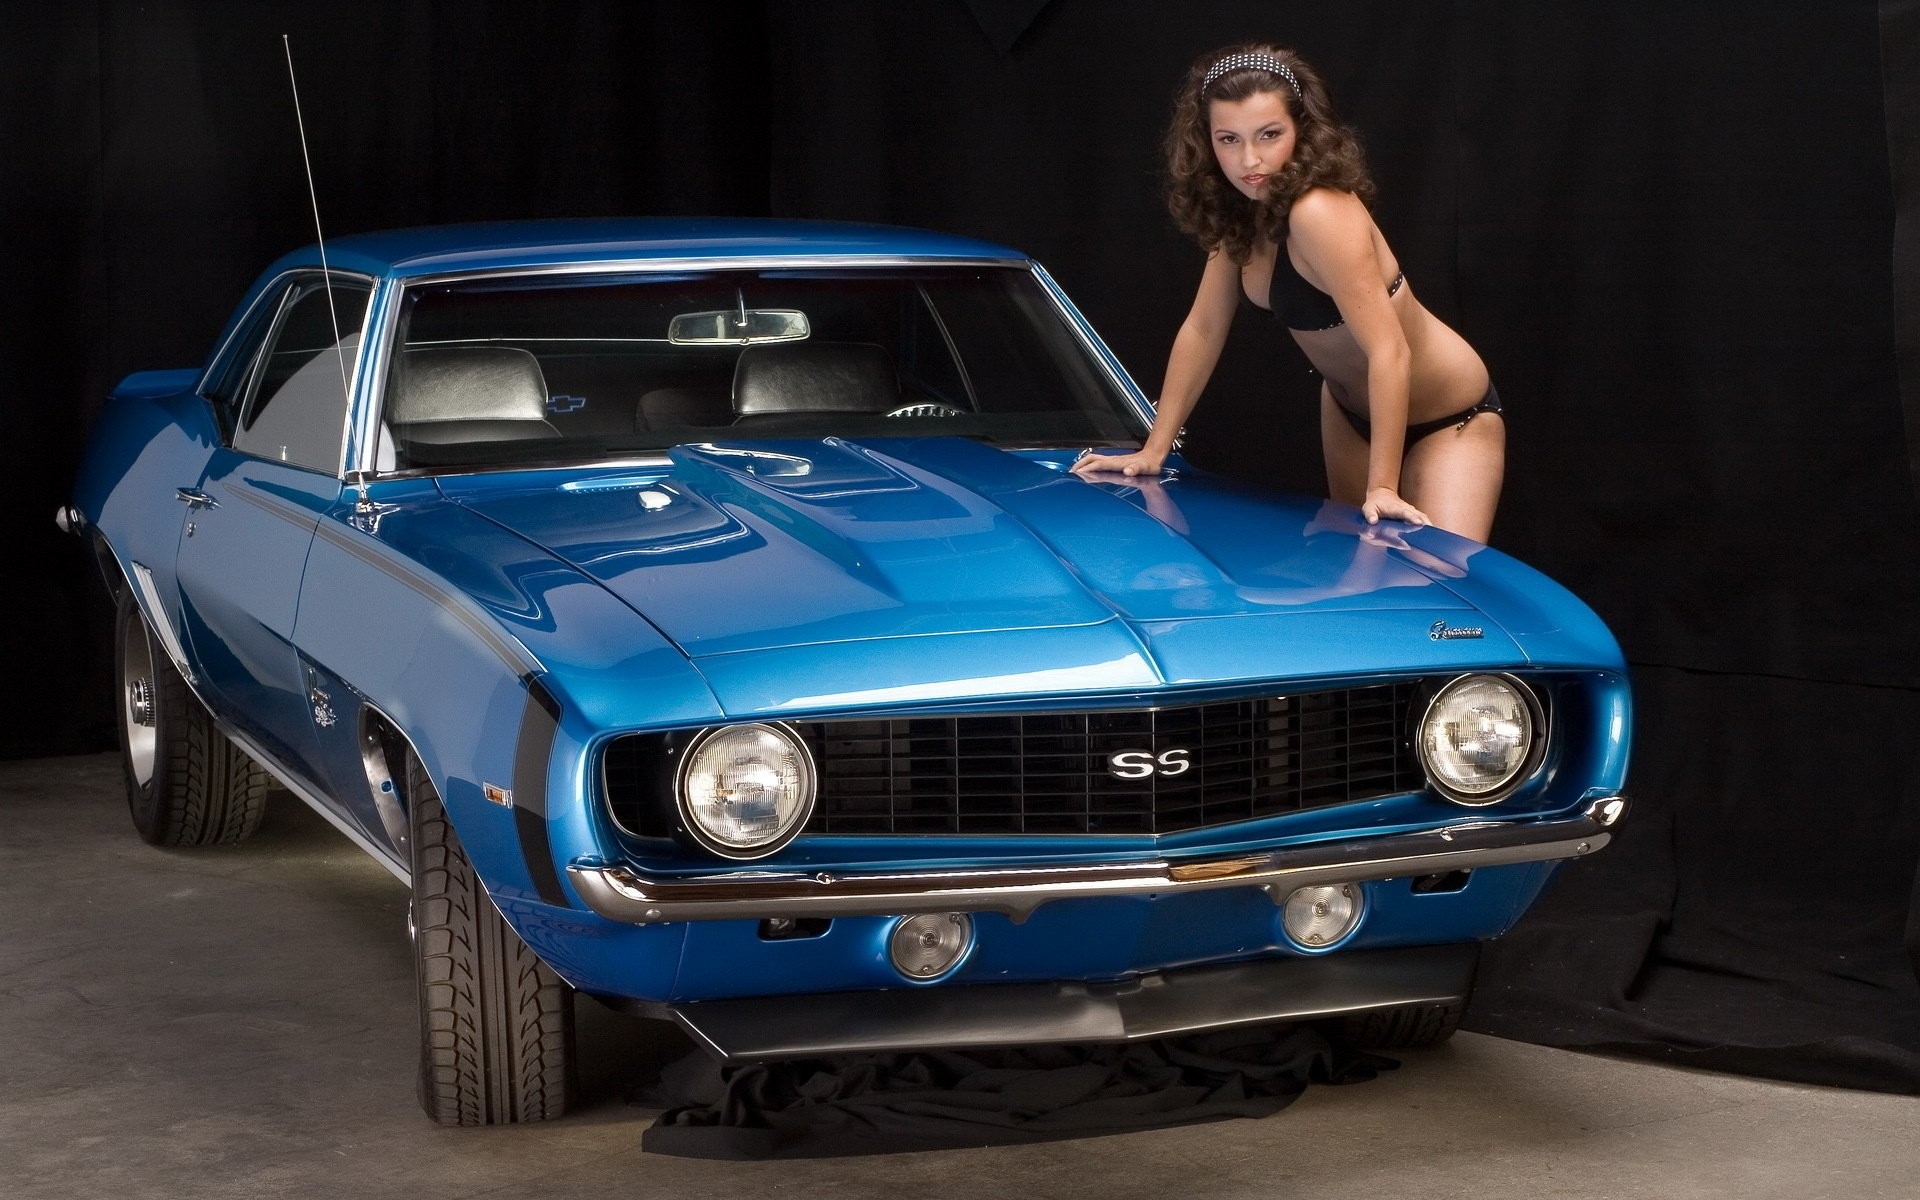 1920x1200 Blue Chevrolet Camaro SS With Girl